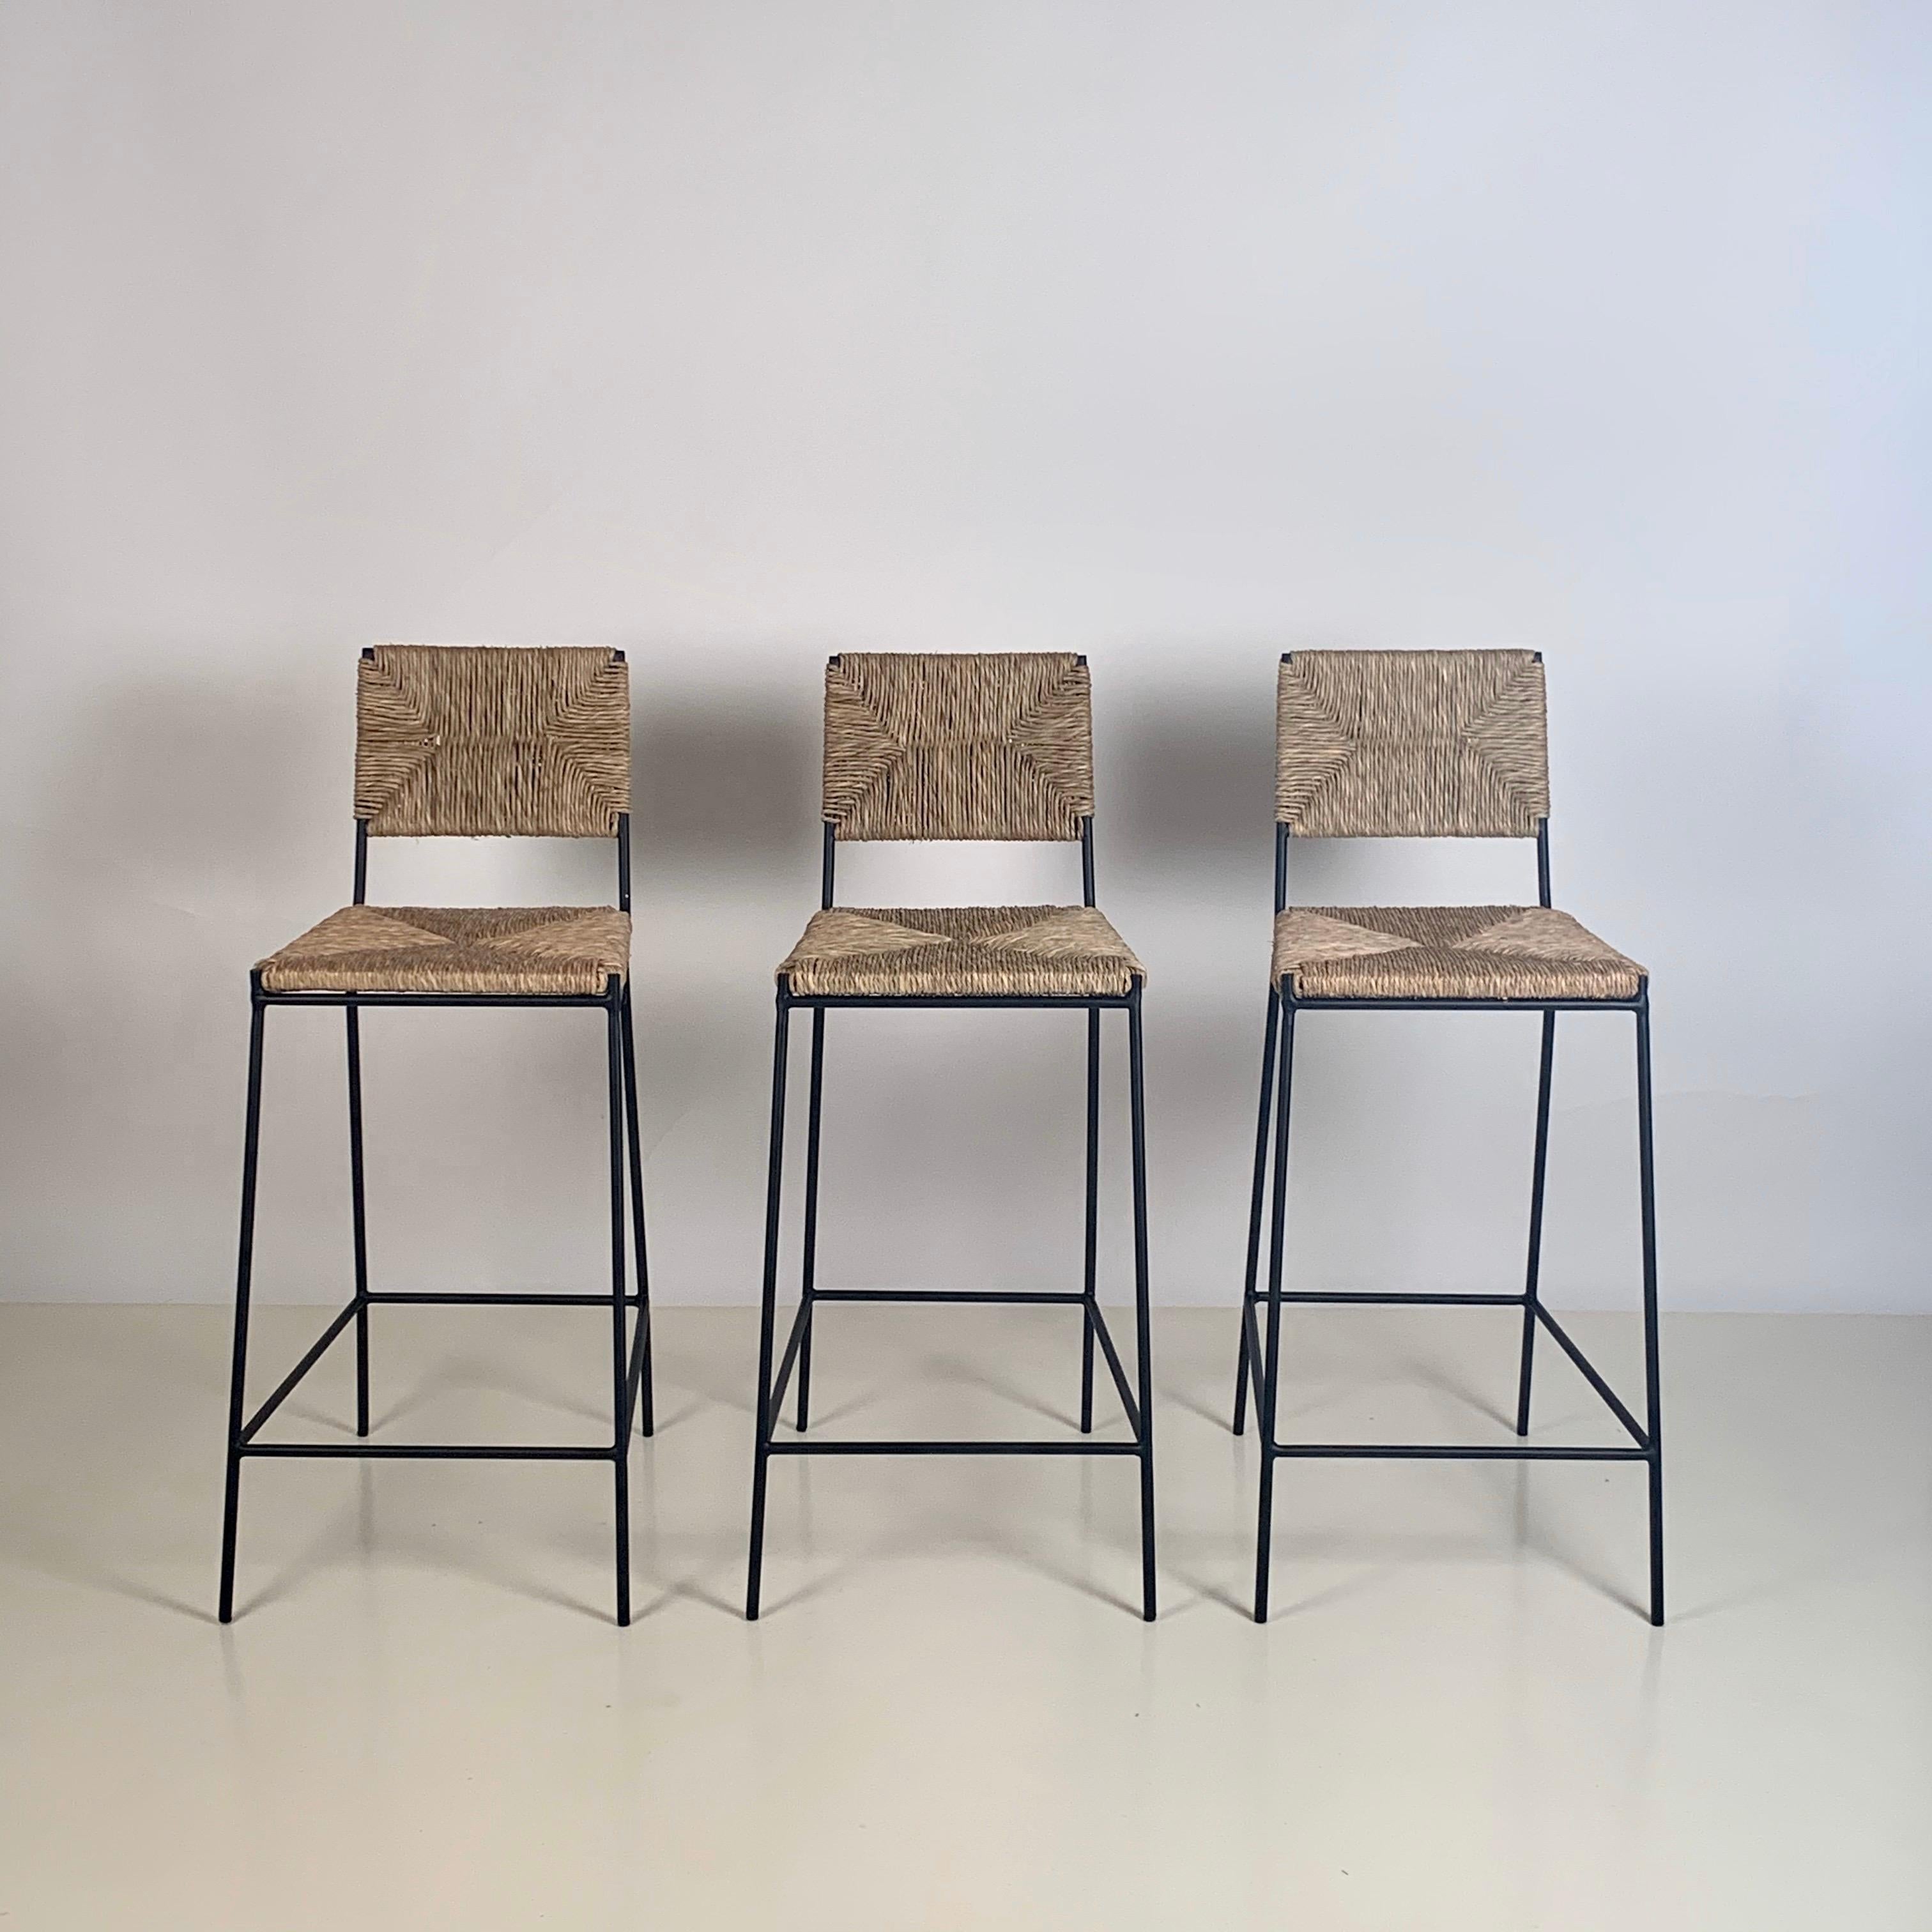 Set of 3 'Campagne' counter height stools by Design Frères.

Chic combination of slender but sturdy and stabile powder-coated steel frames with handwoven rush seats and backs. Extra support under the rush seat for durability. Durable plastic caps